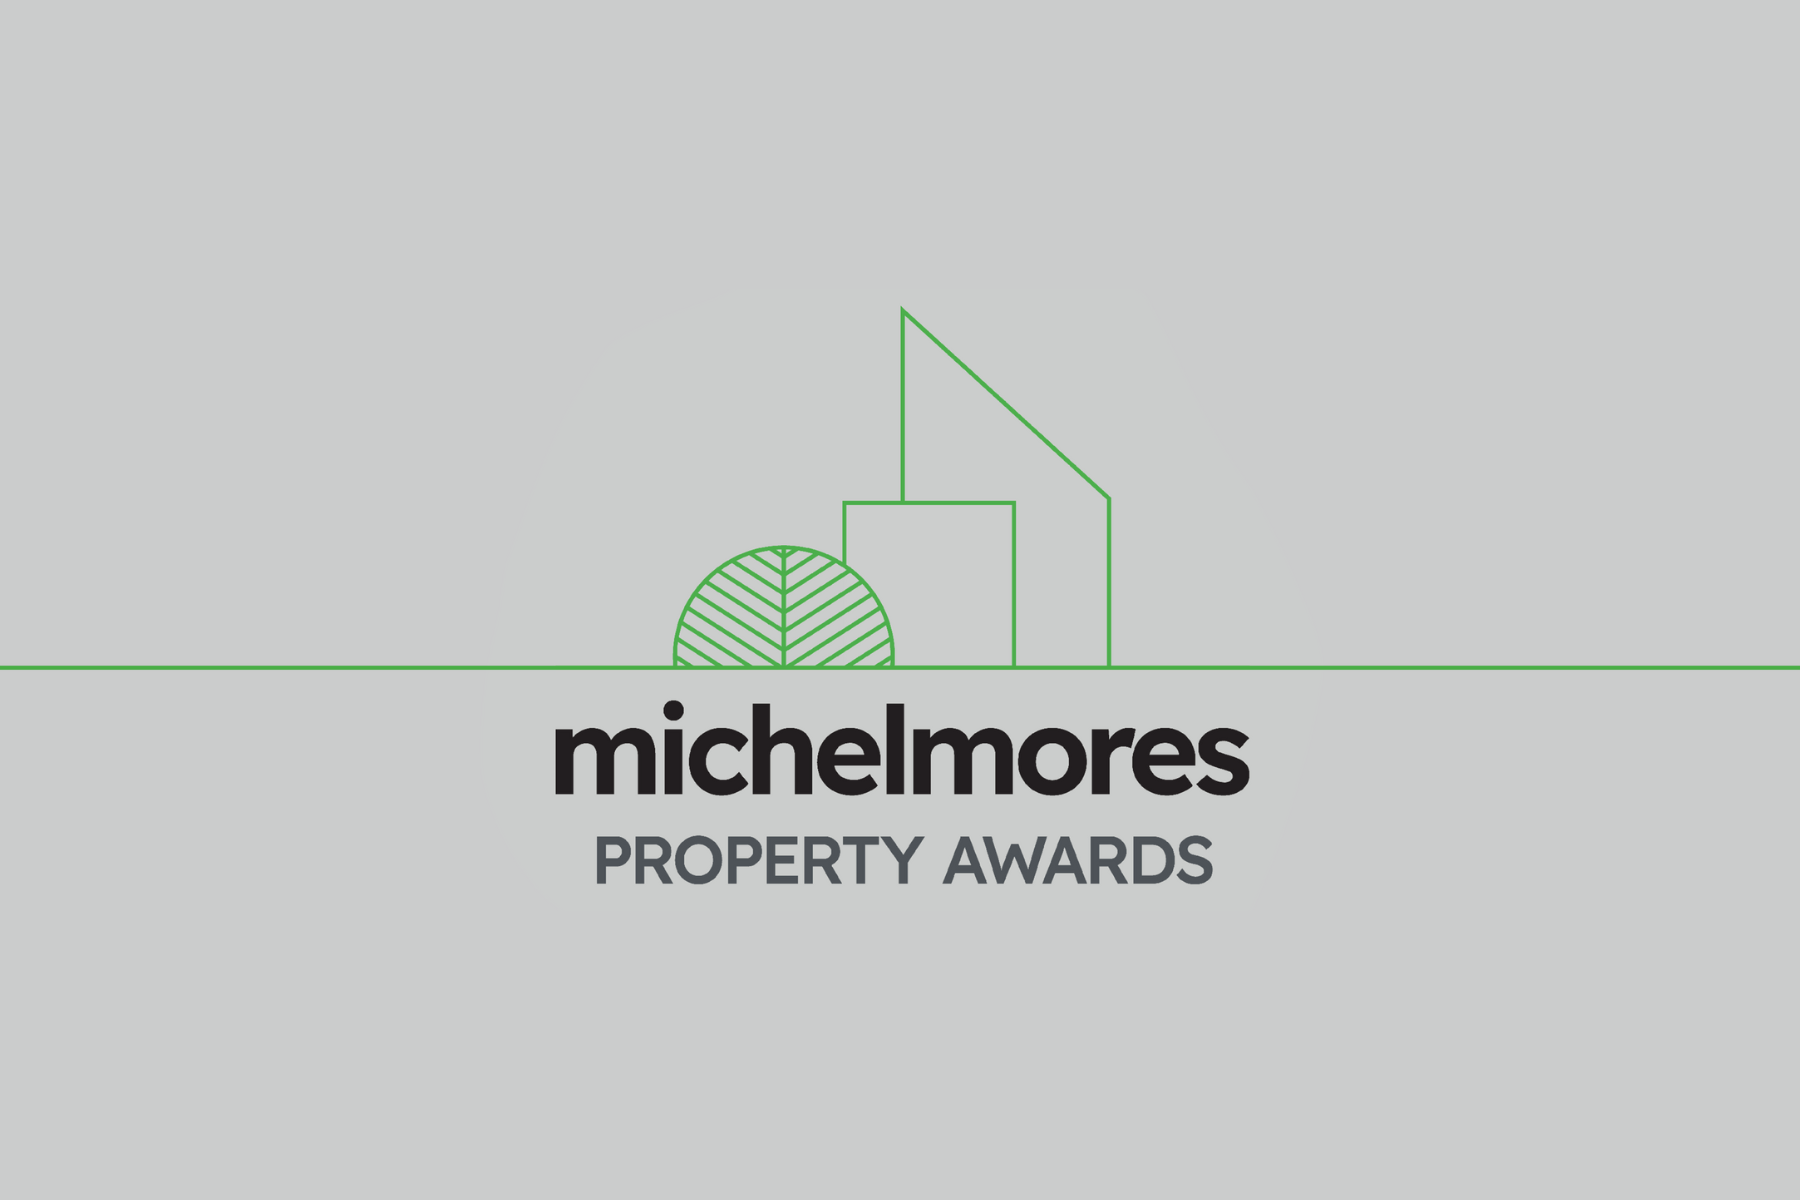 Michelmores Property Awards